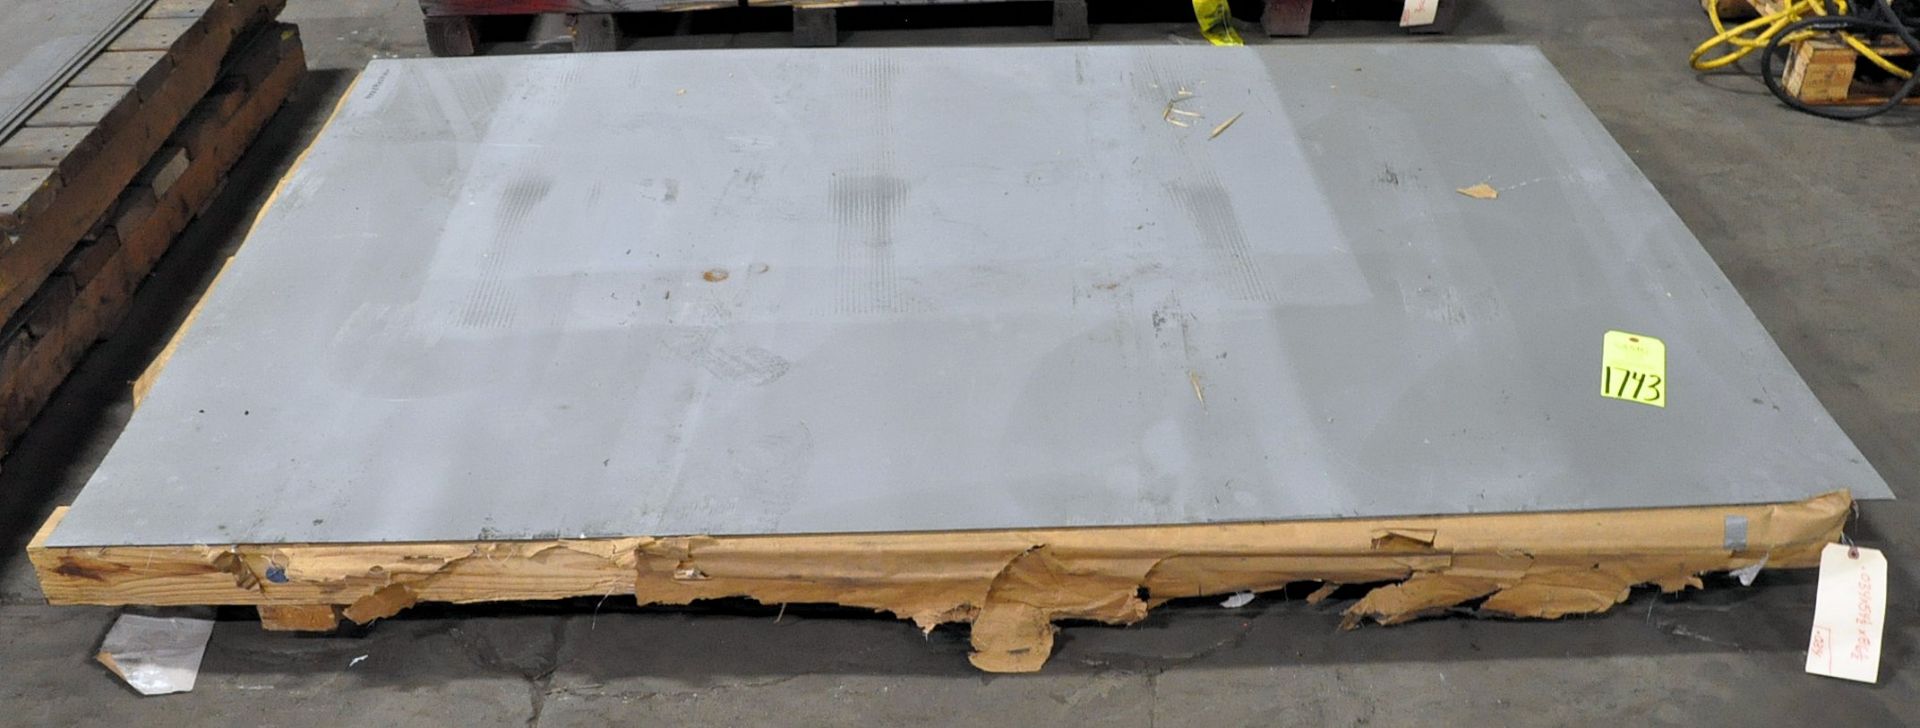 Lot-.034 x 54 1/2" x 86 1/2" Sheet Metal Stock on (1) Pallet, (Warehouse Room), (Yellow Tag)